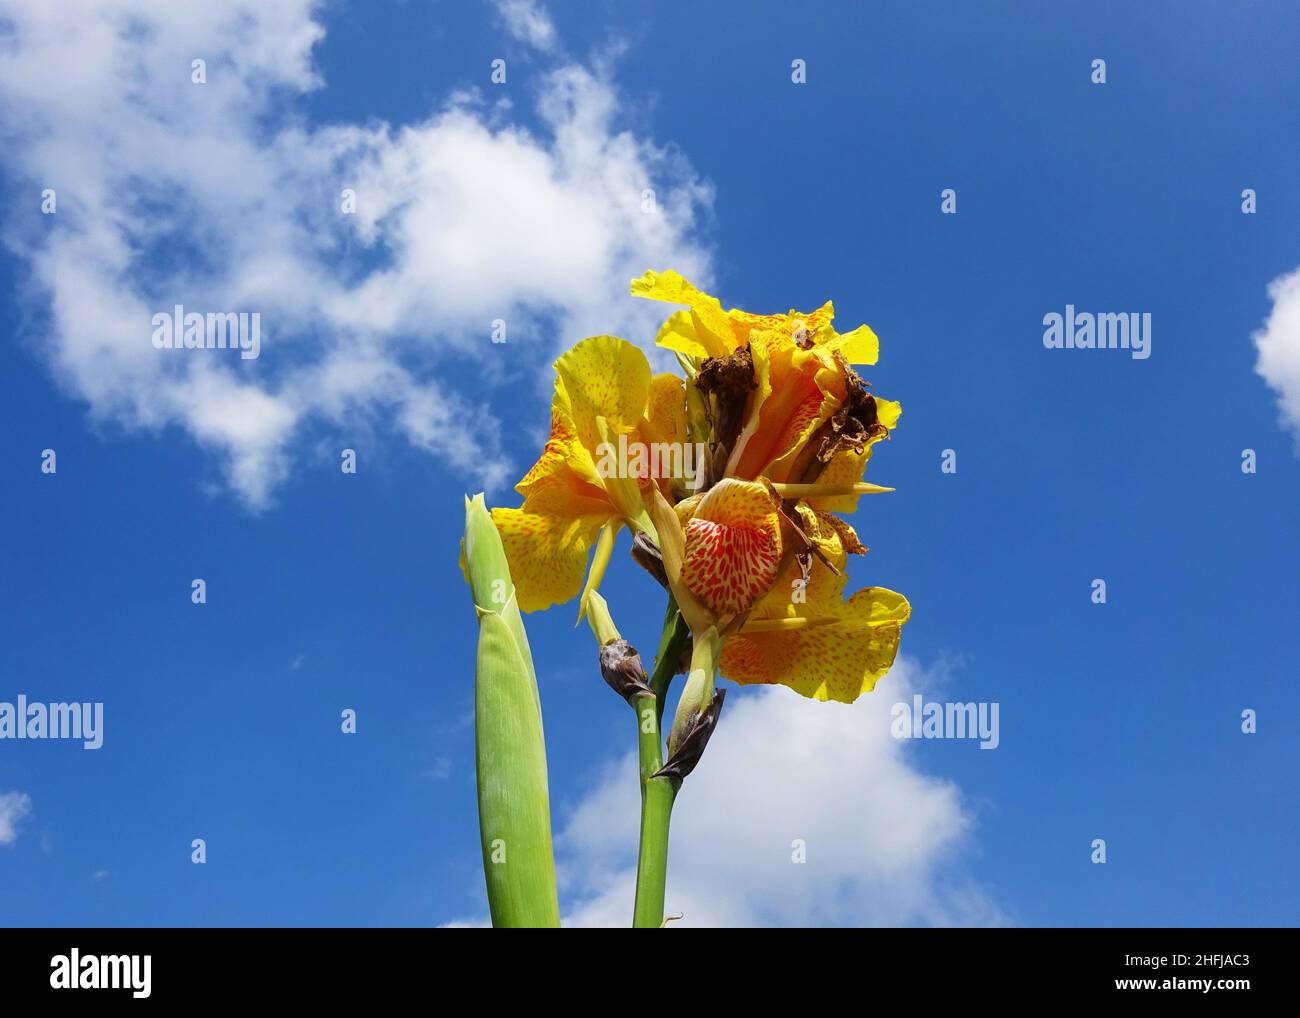 Yellow canna lily flower Stock Photo